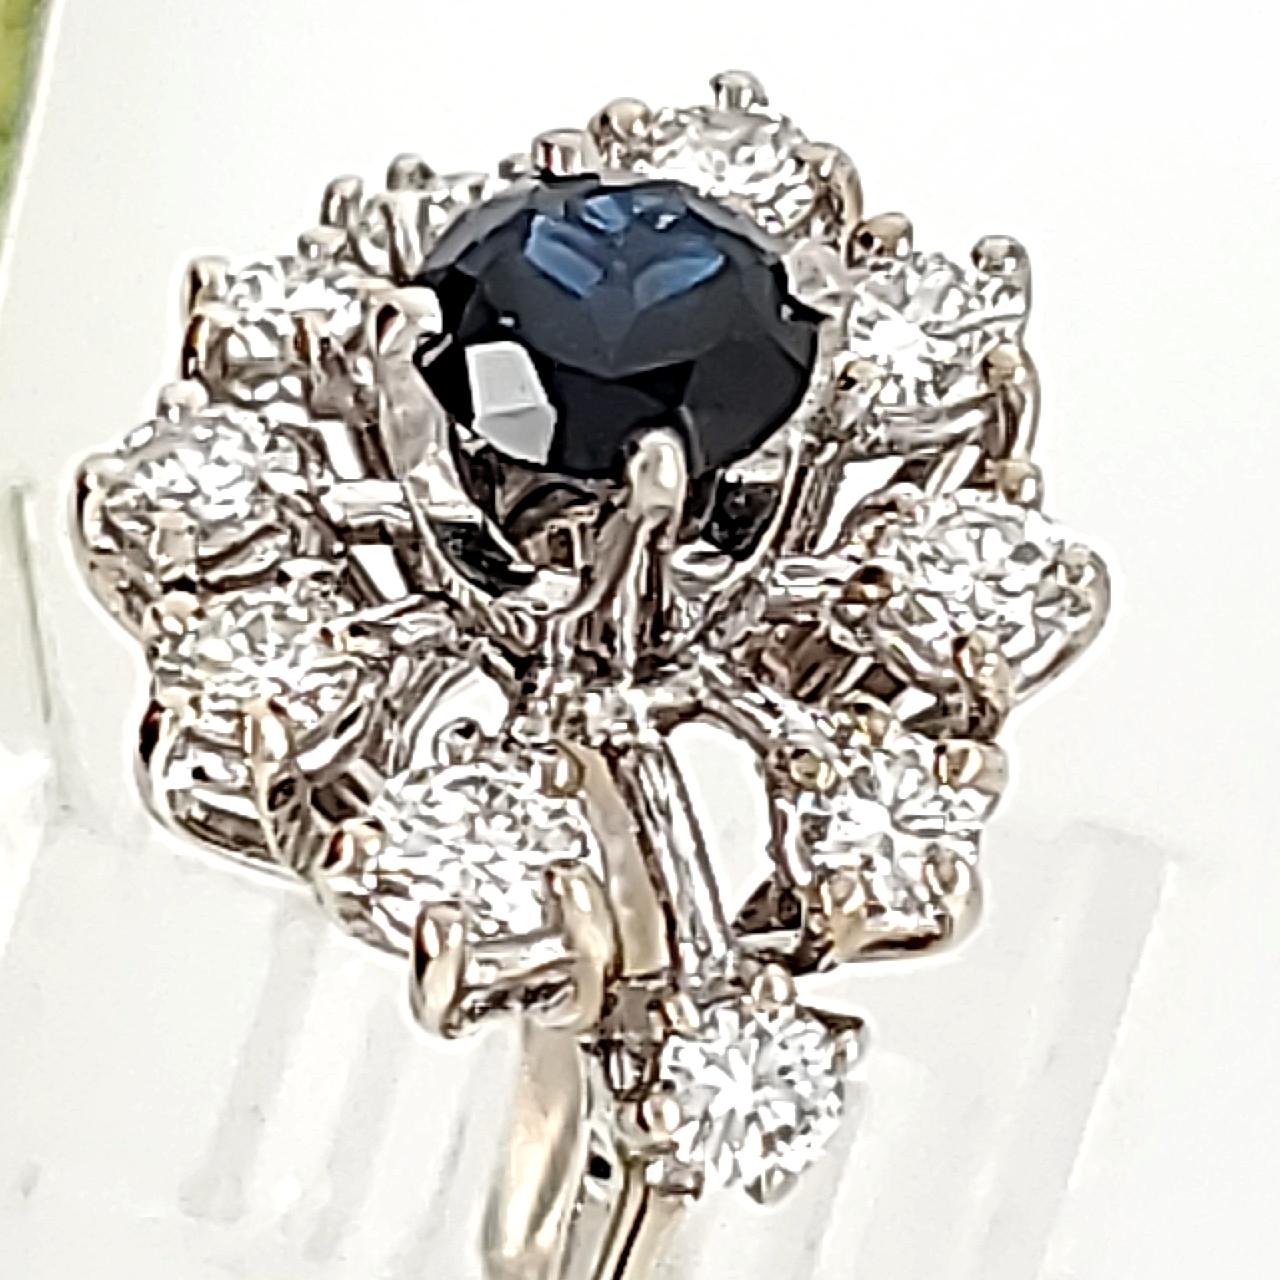 An estate piece originally purchased about 30 years ago at the Famous Brimfield Antique Show.  Center stone was removed and replaced with a 71pt round dark blue sapphire - reminiscent of those to be found in older jewelry.  Diamonds are fairly